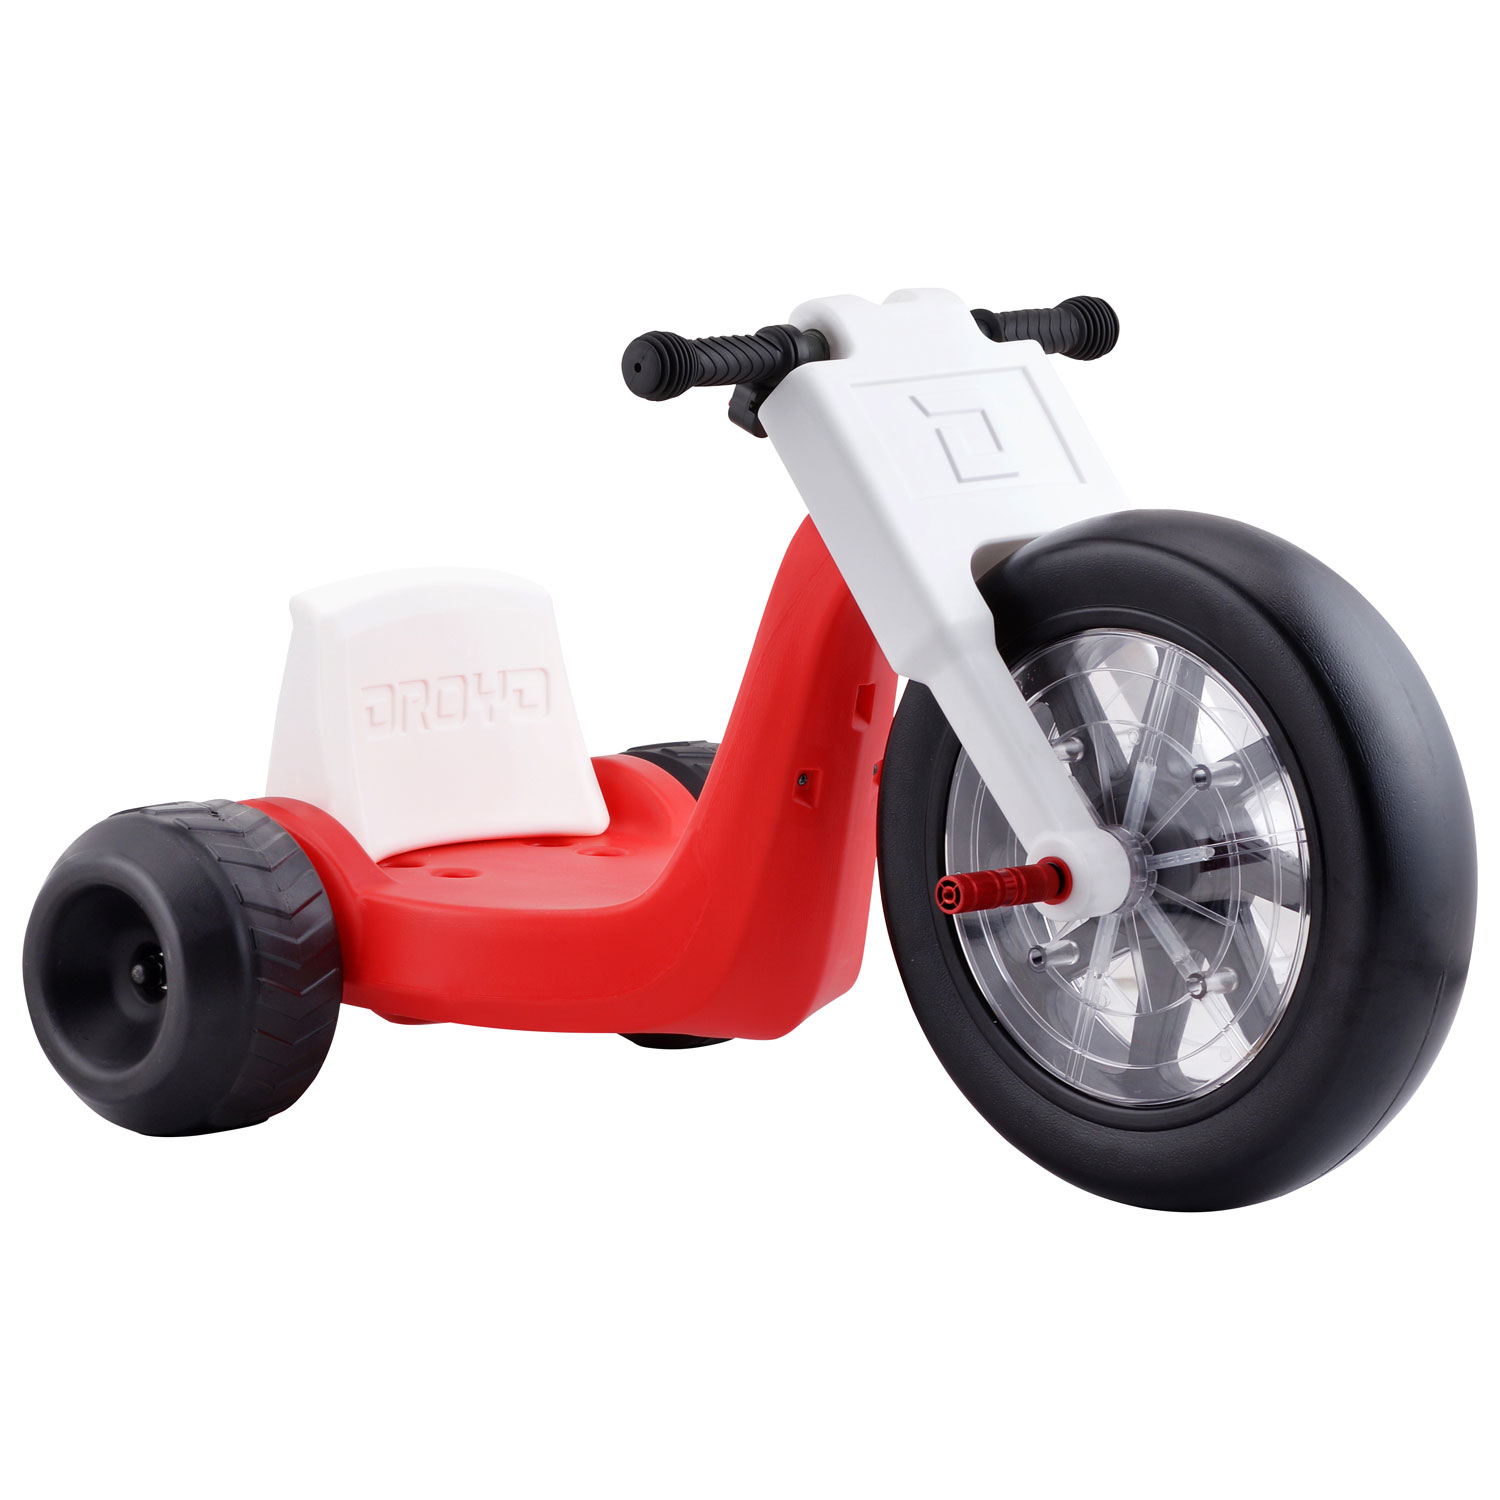 Droyd Romper Ride-On Toy Electric Bike - Ages 3+ - Red/White - Only at Best Buy